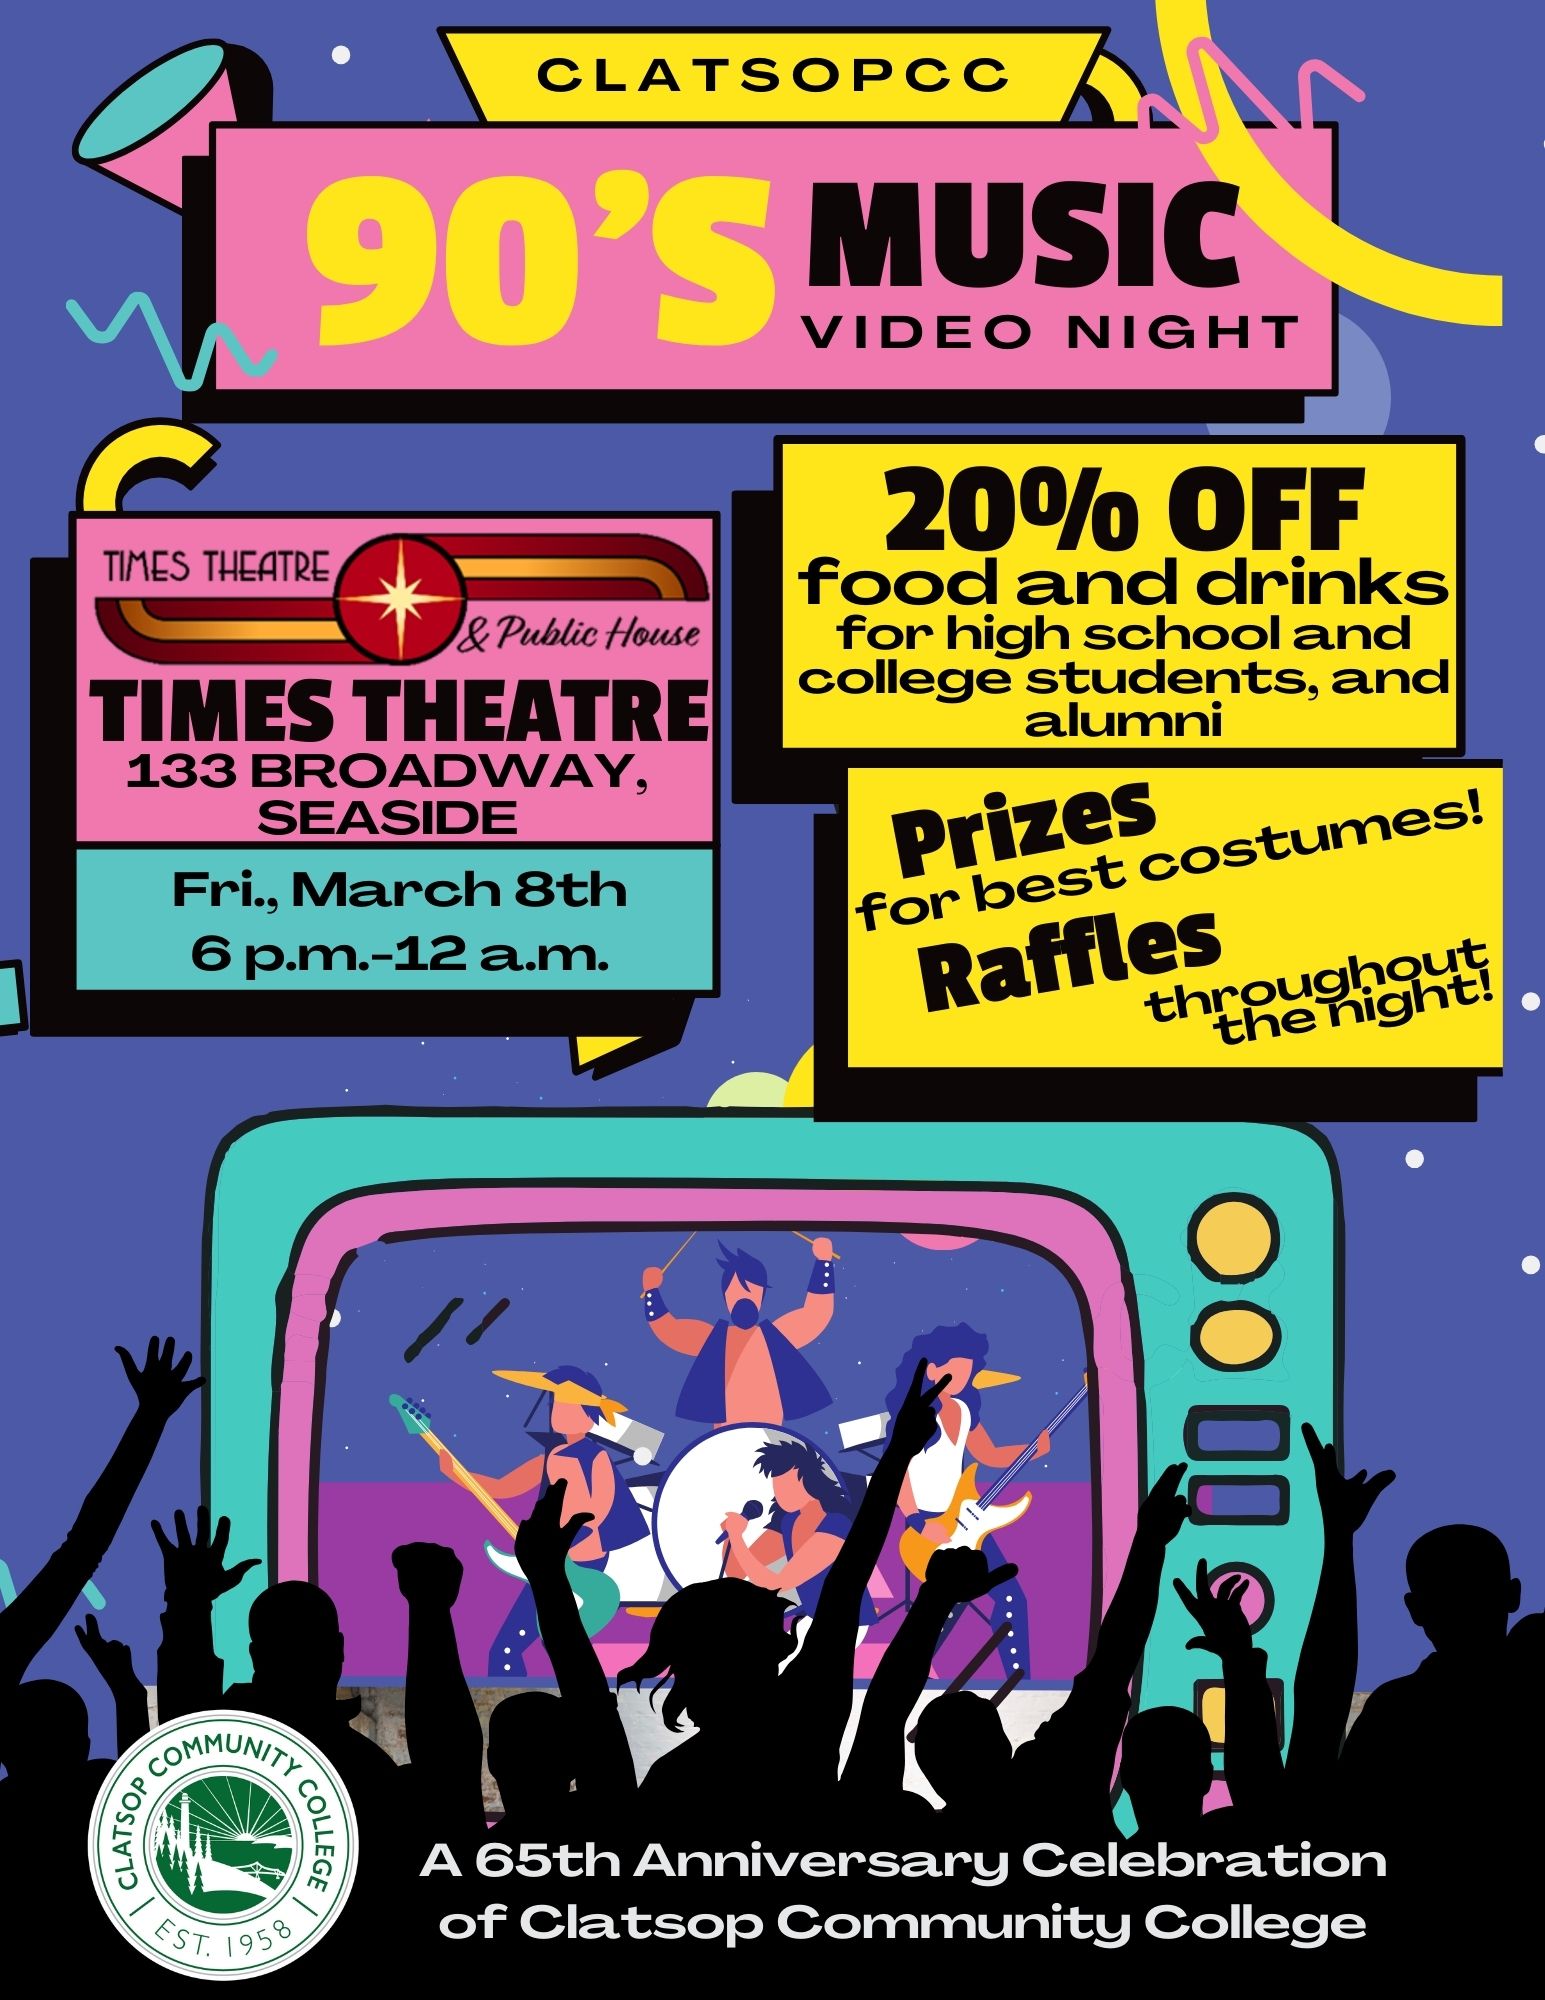 90's Music Video Night flyer with 90's graphics